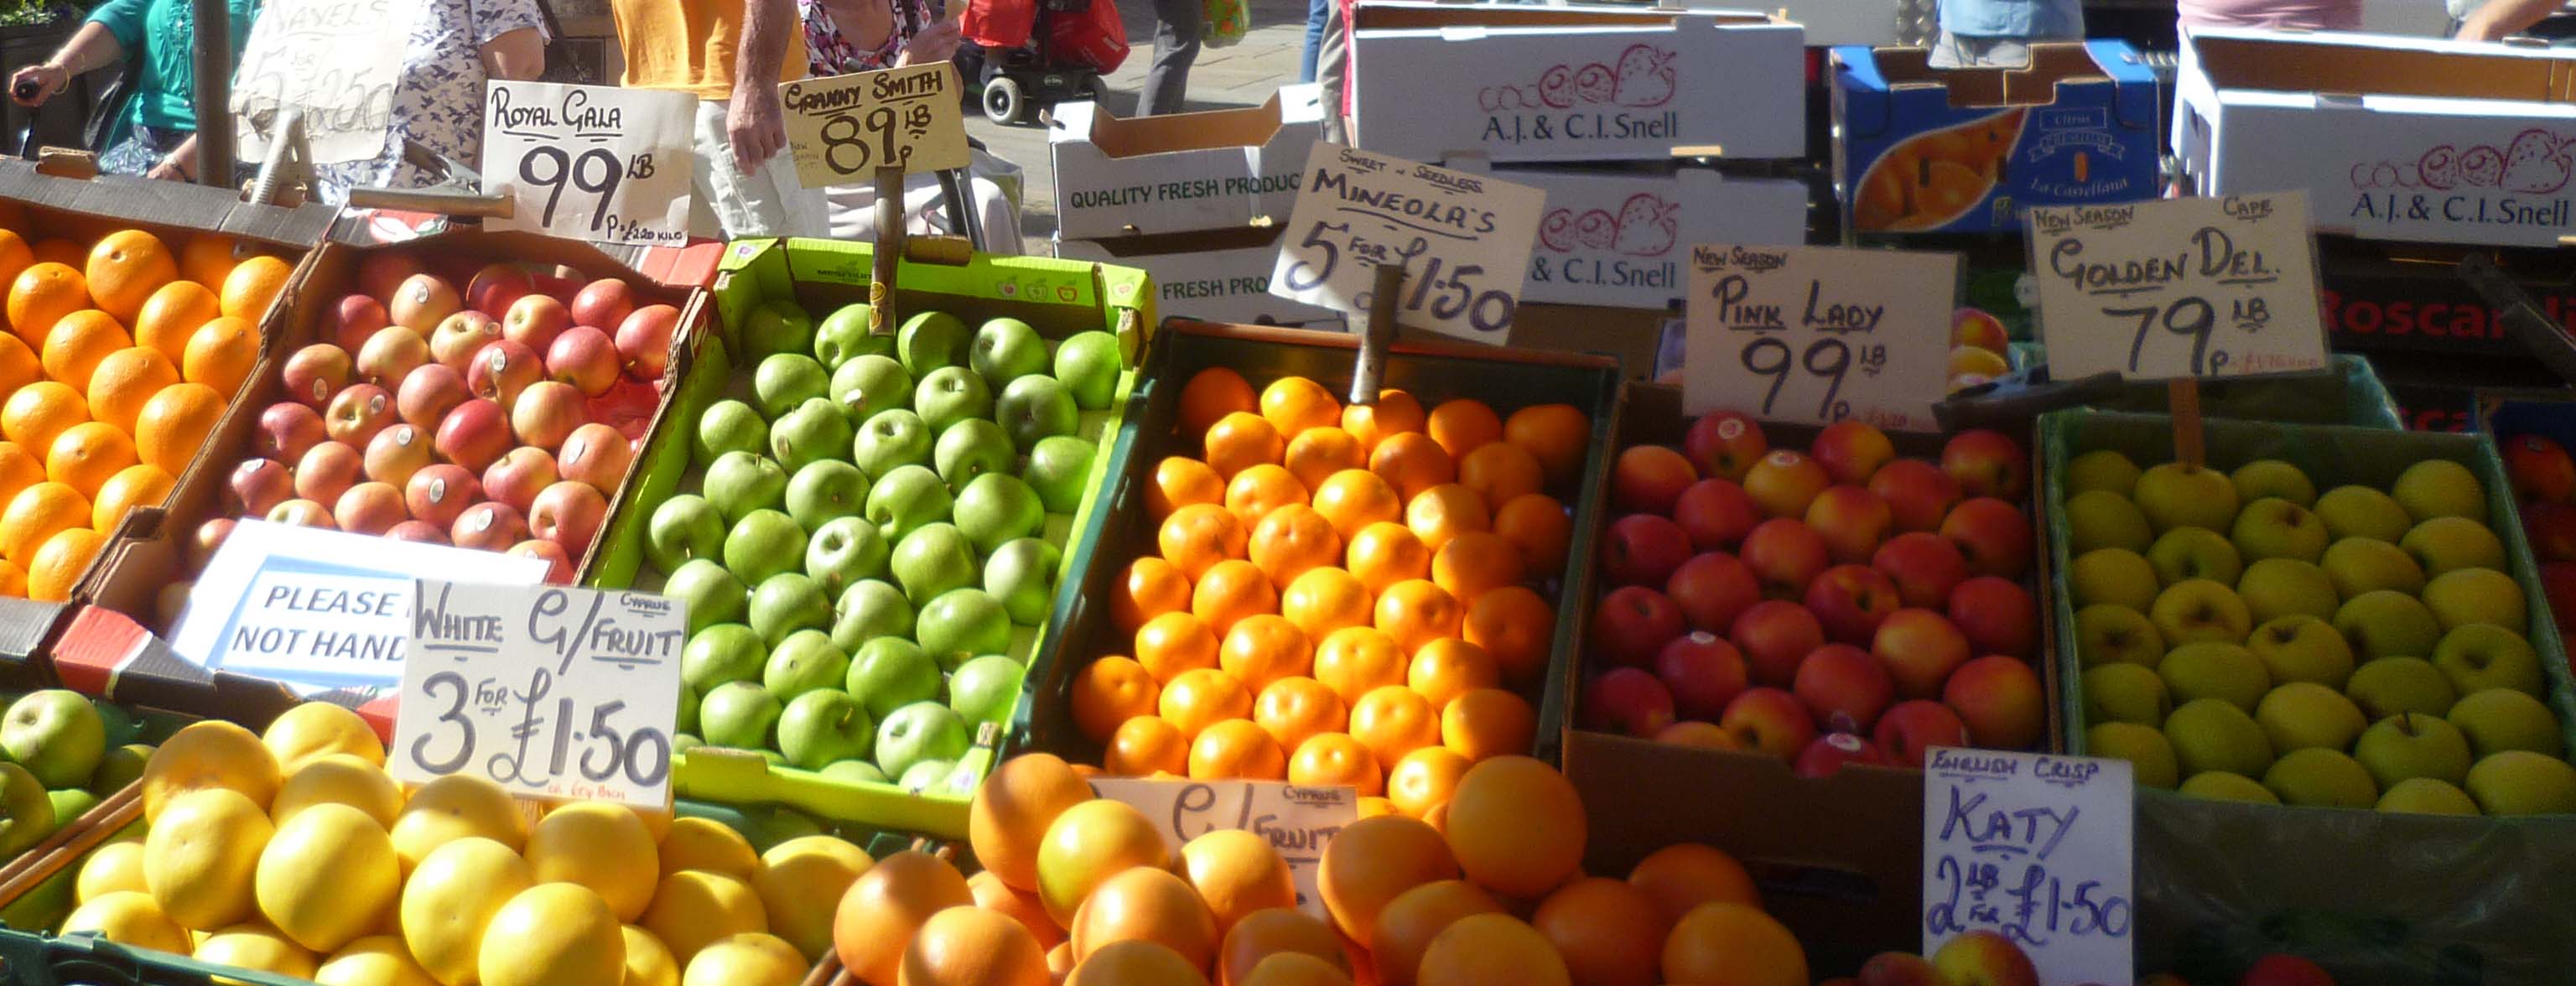 File:Typical UK fruit and vegetable stall 2013.jpg - Wikimedia Commons